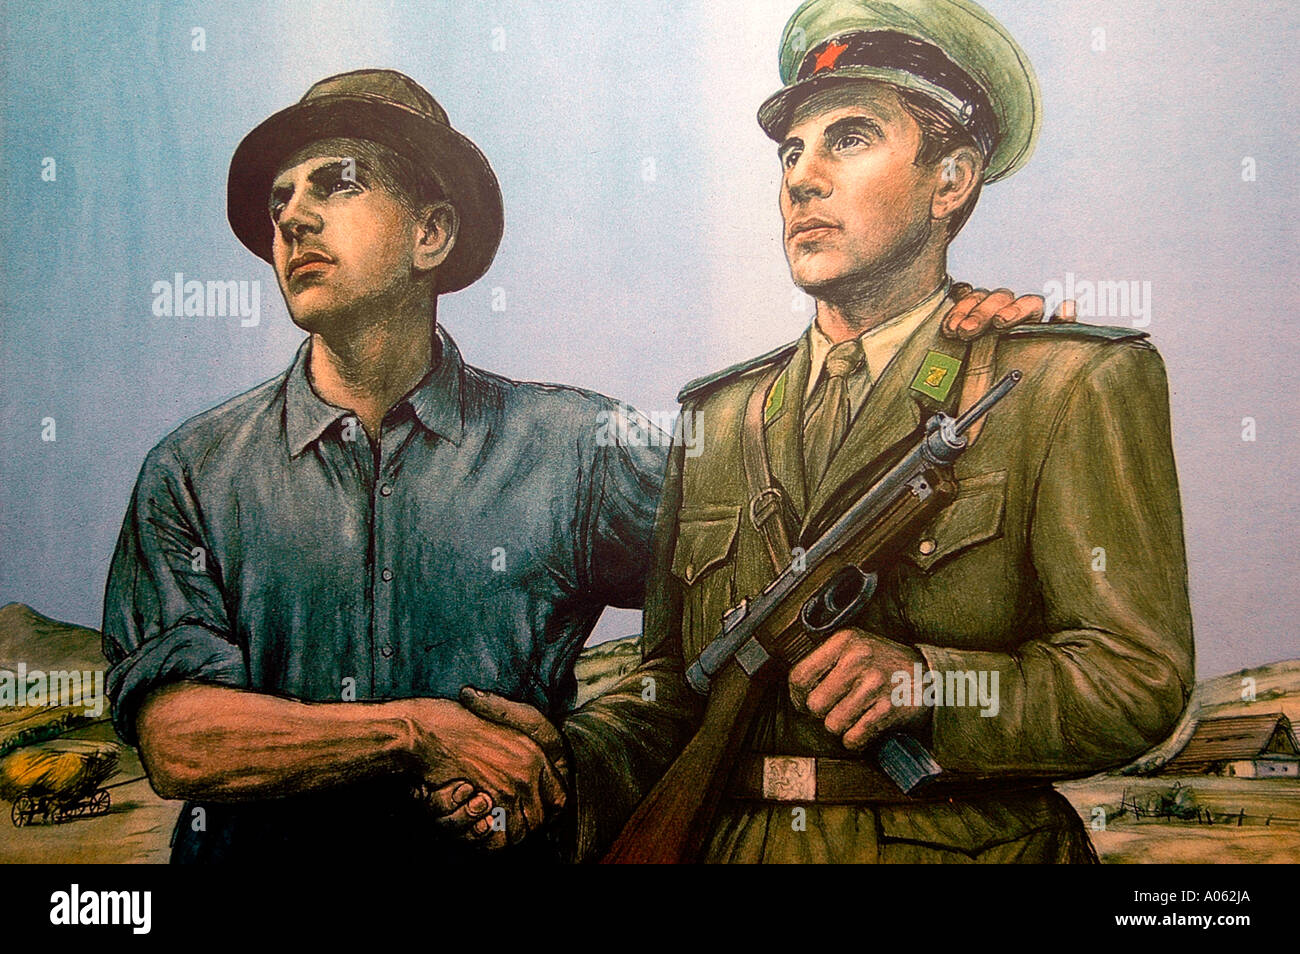 Socialist realism political oil painting depicts a soldier with a civilian shaking hands. Czech Stock Photo